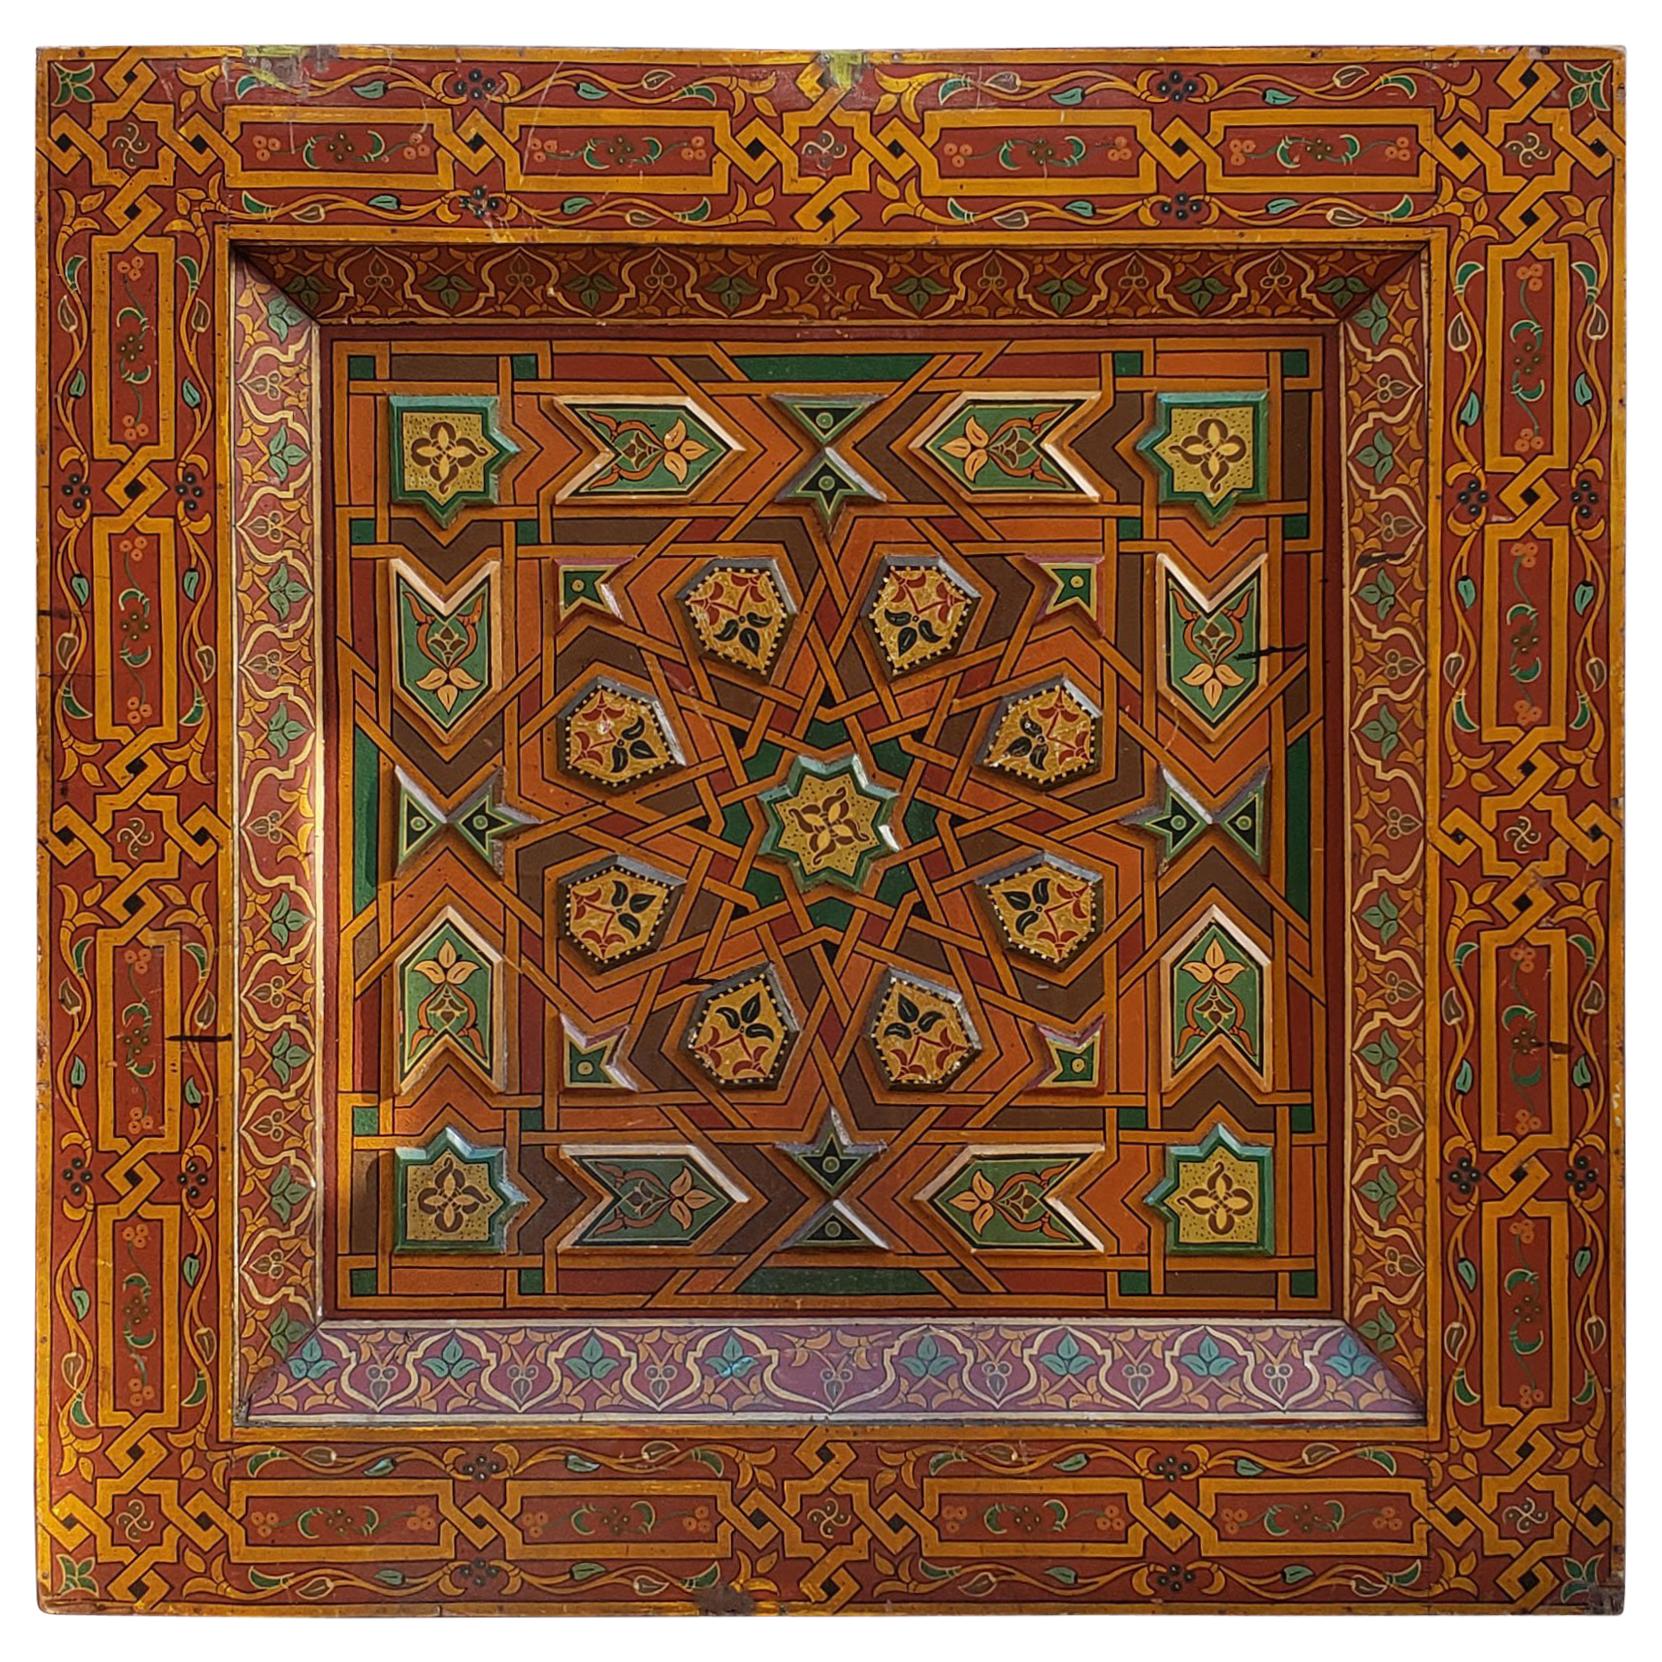 Moroccan Hand Painted Wall Hanging / Wooden Ceiling 23MO58 For Sale